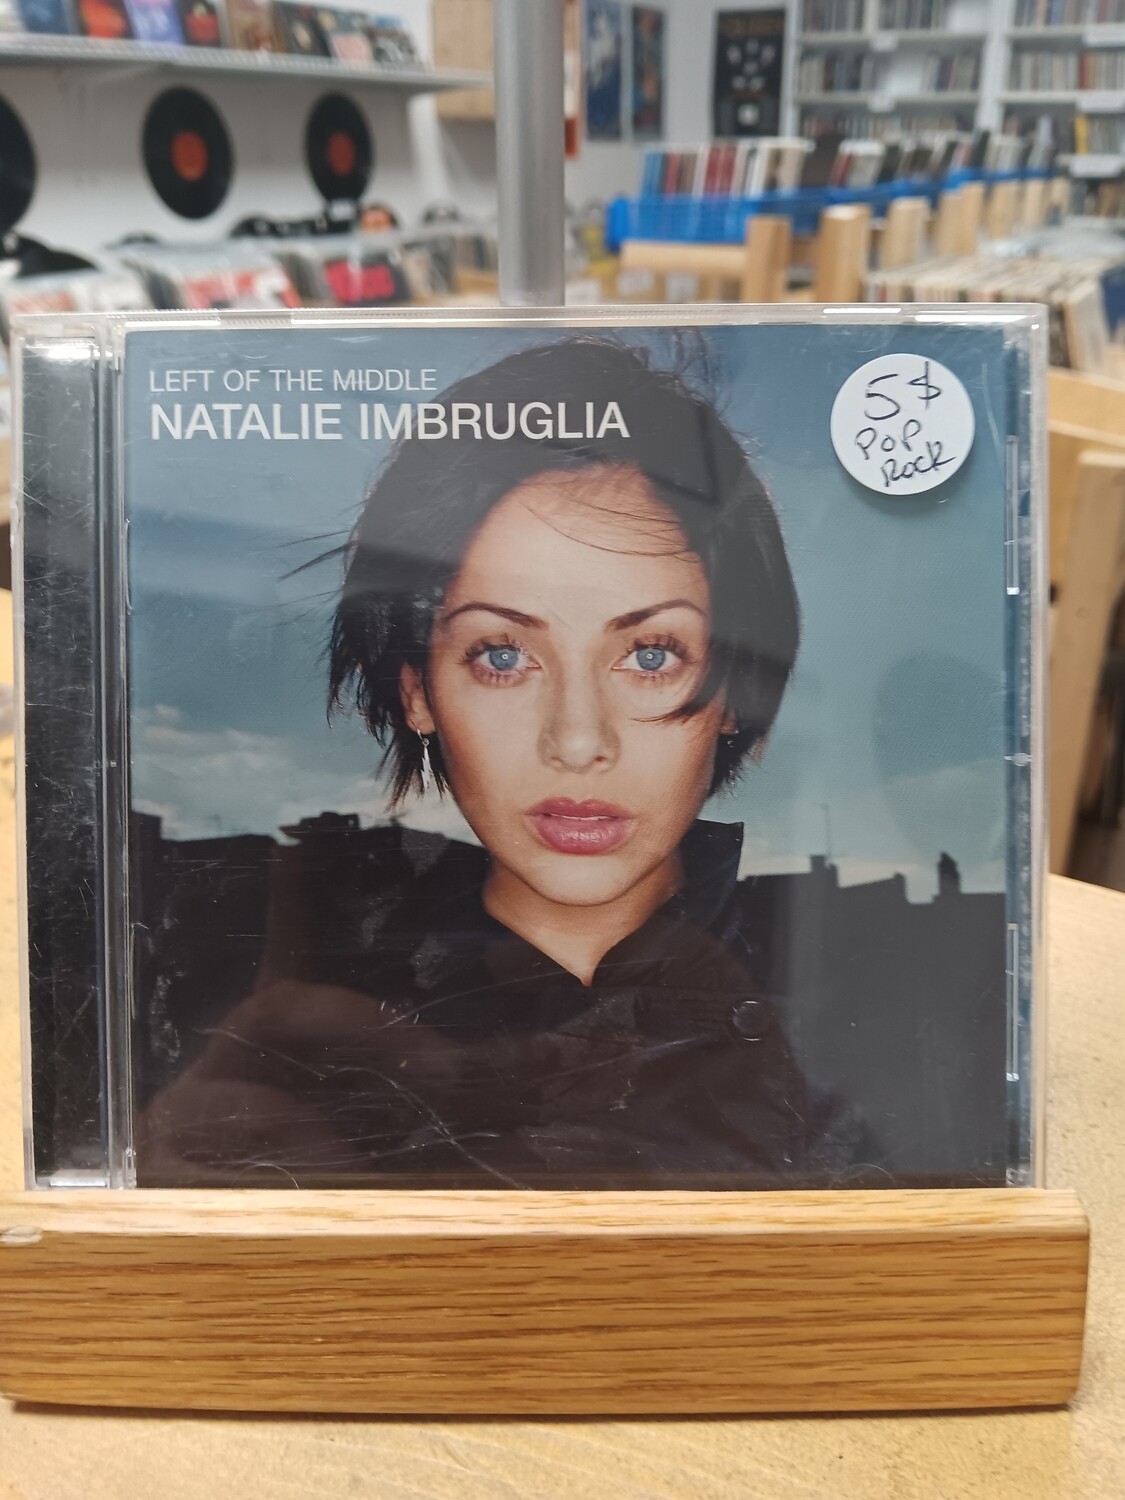 NATHALIE IMBRUGLIA - Left of the middle (CD)